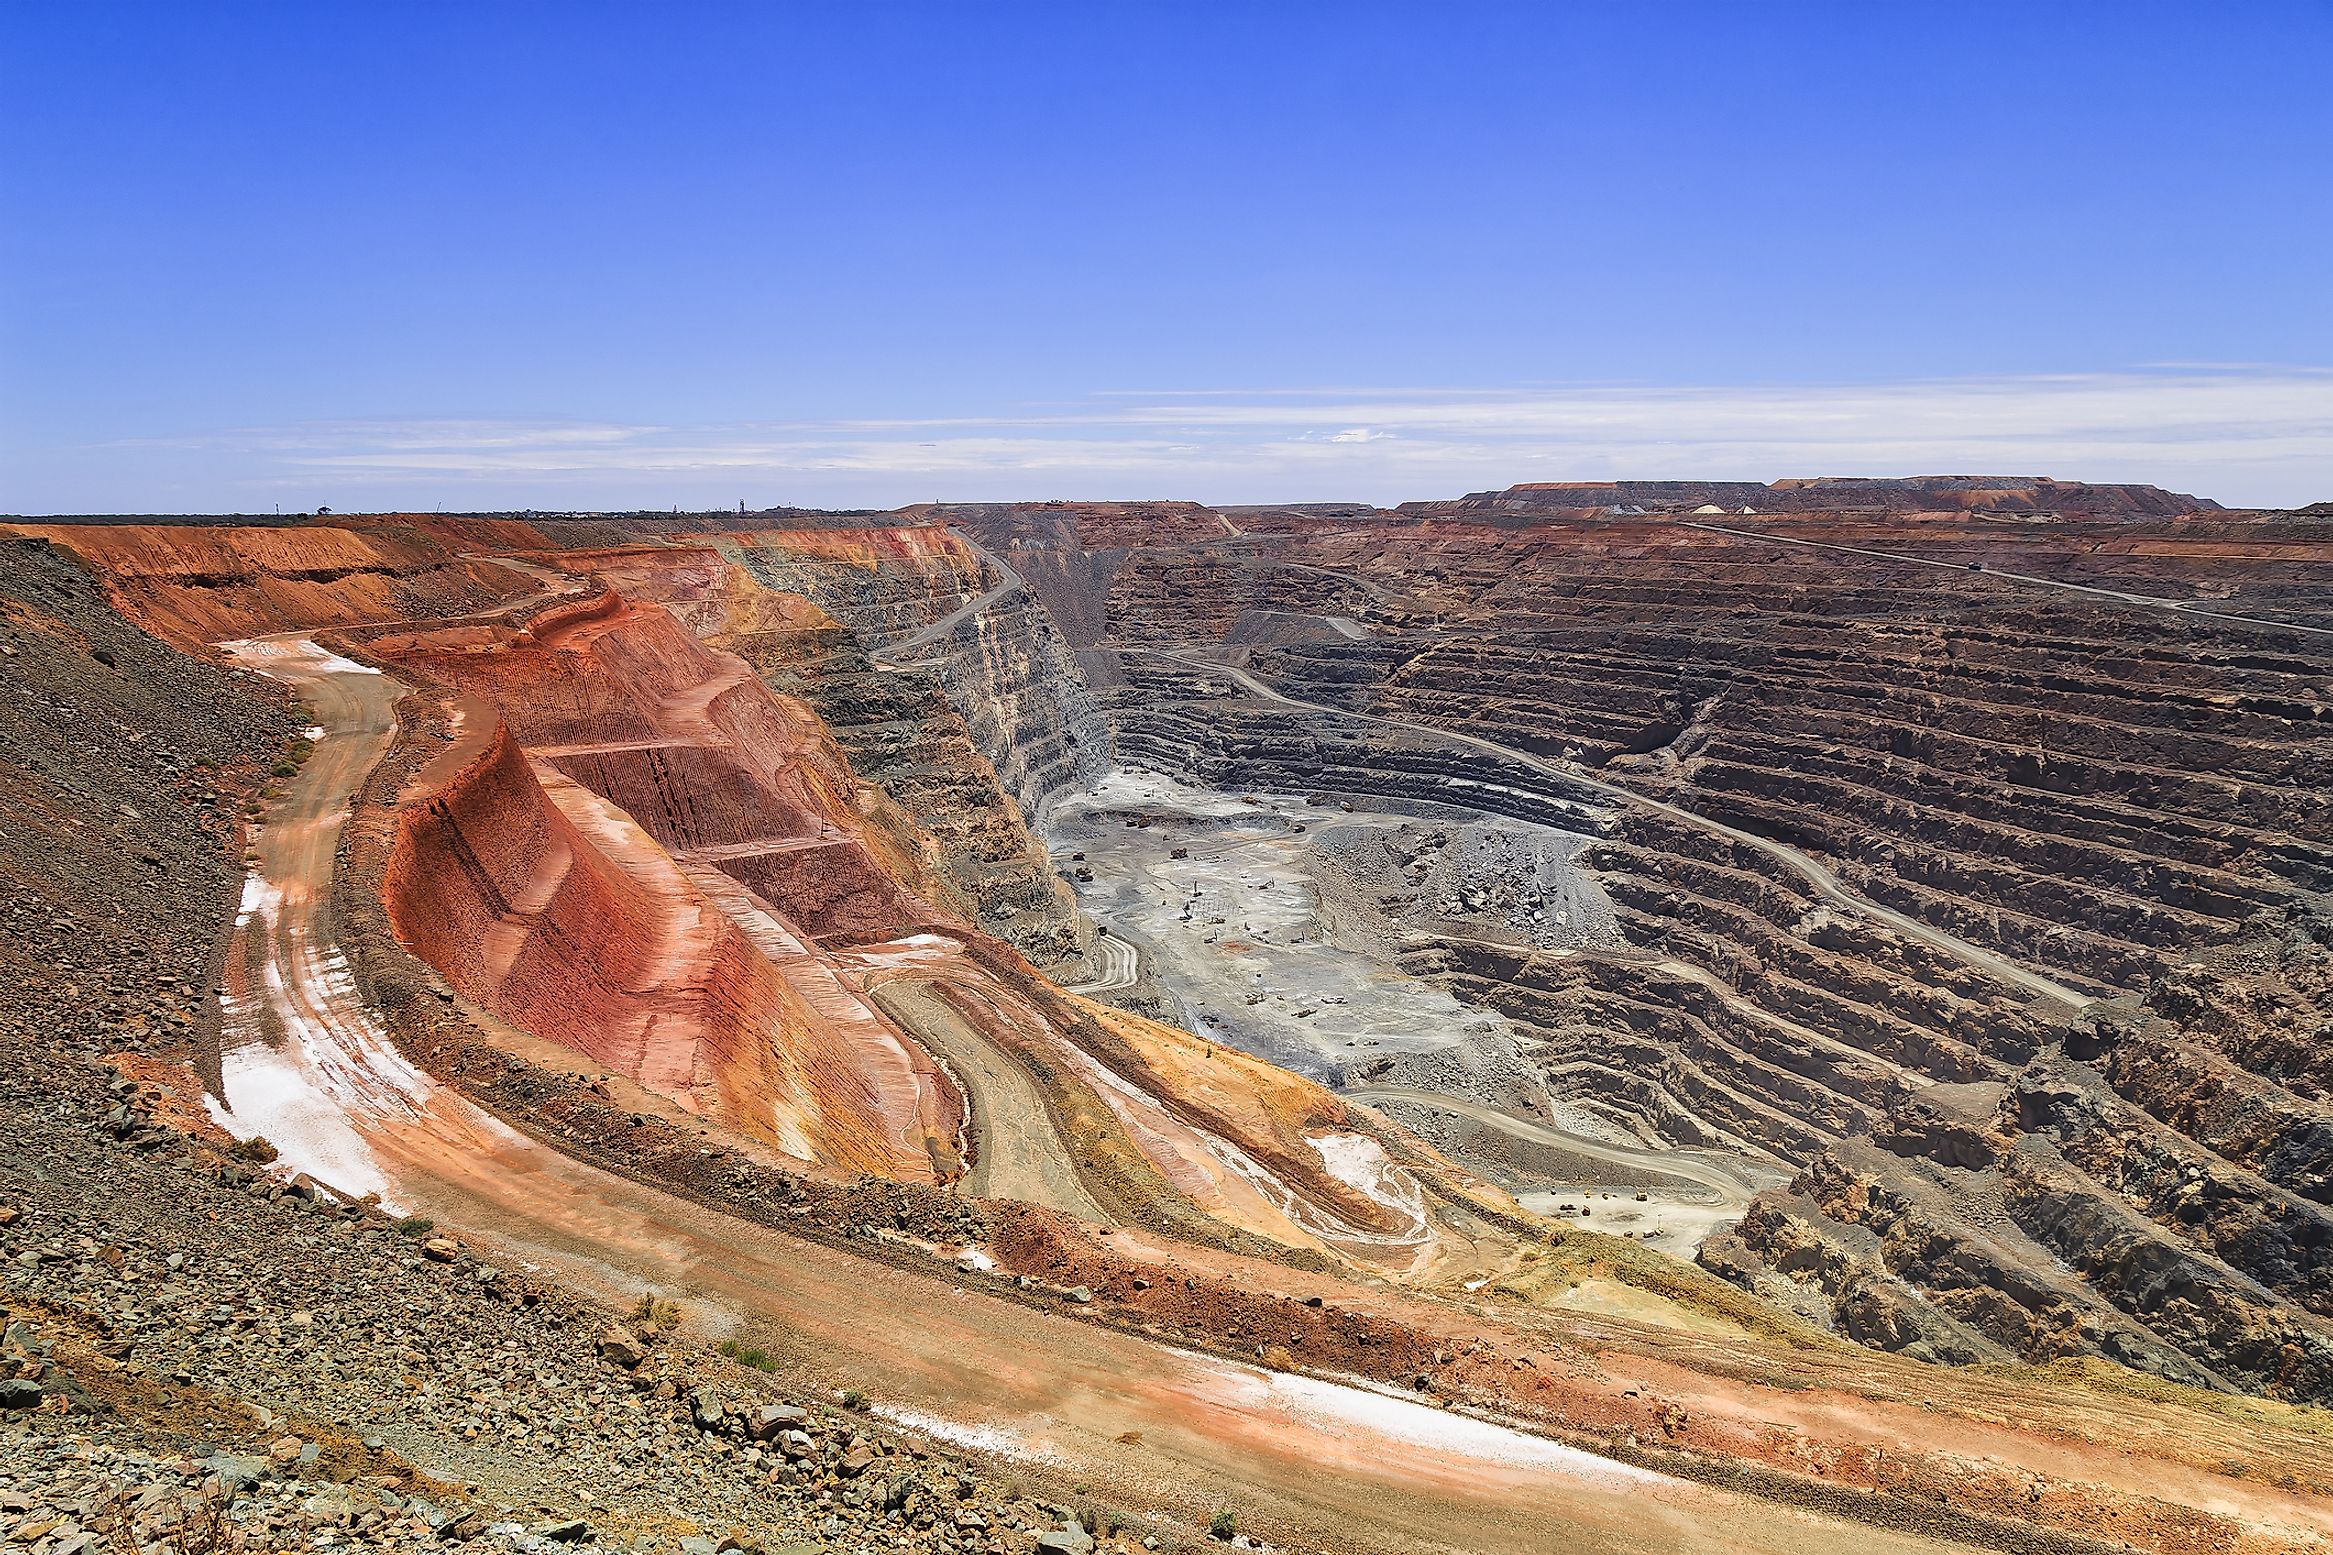 What Is The Environmental Impact Of The Mining Industry? - WorldAtlas